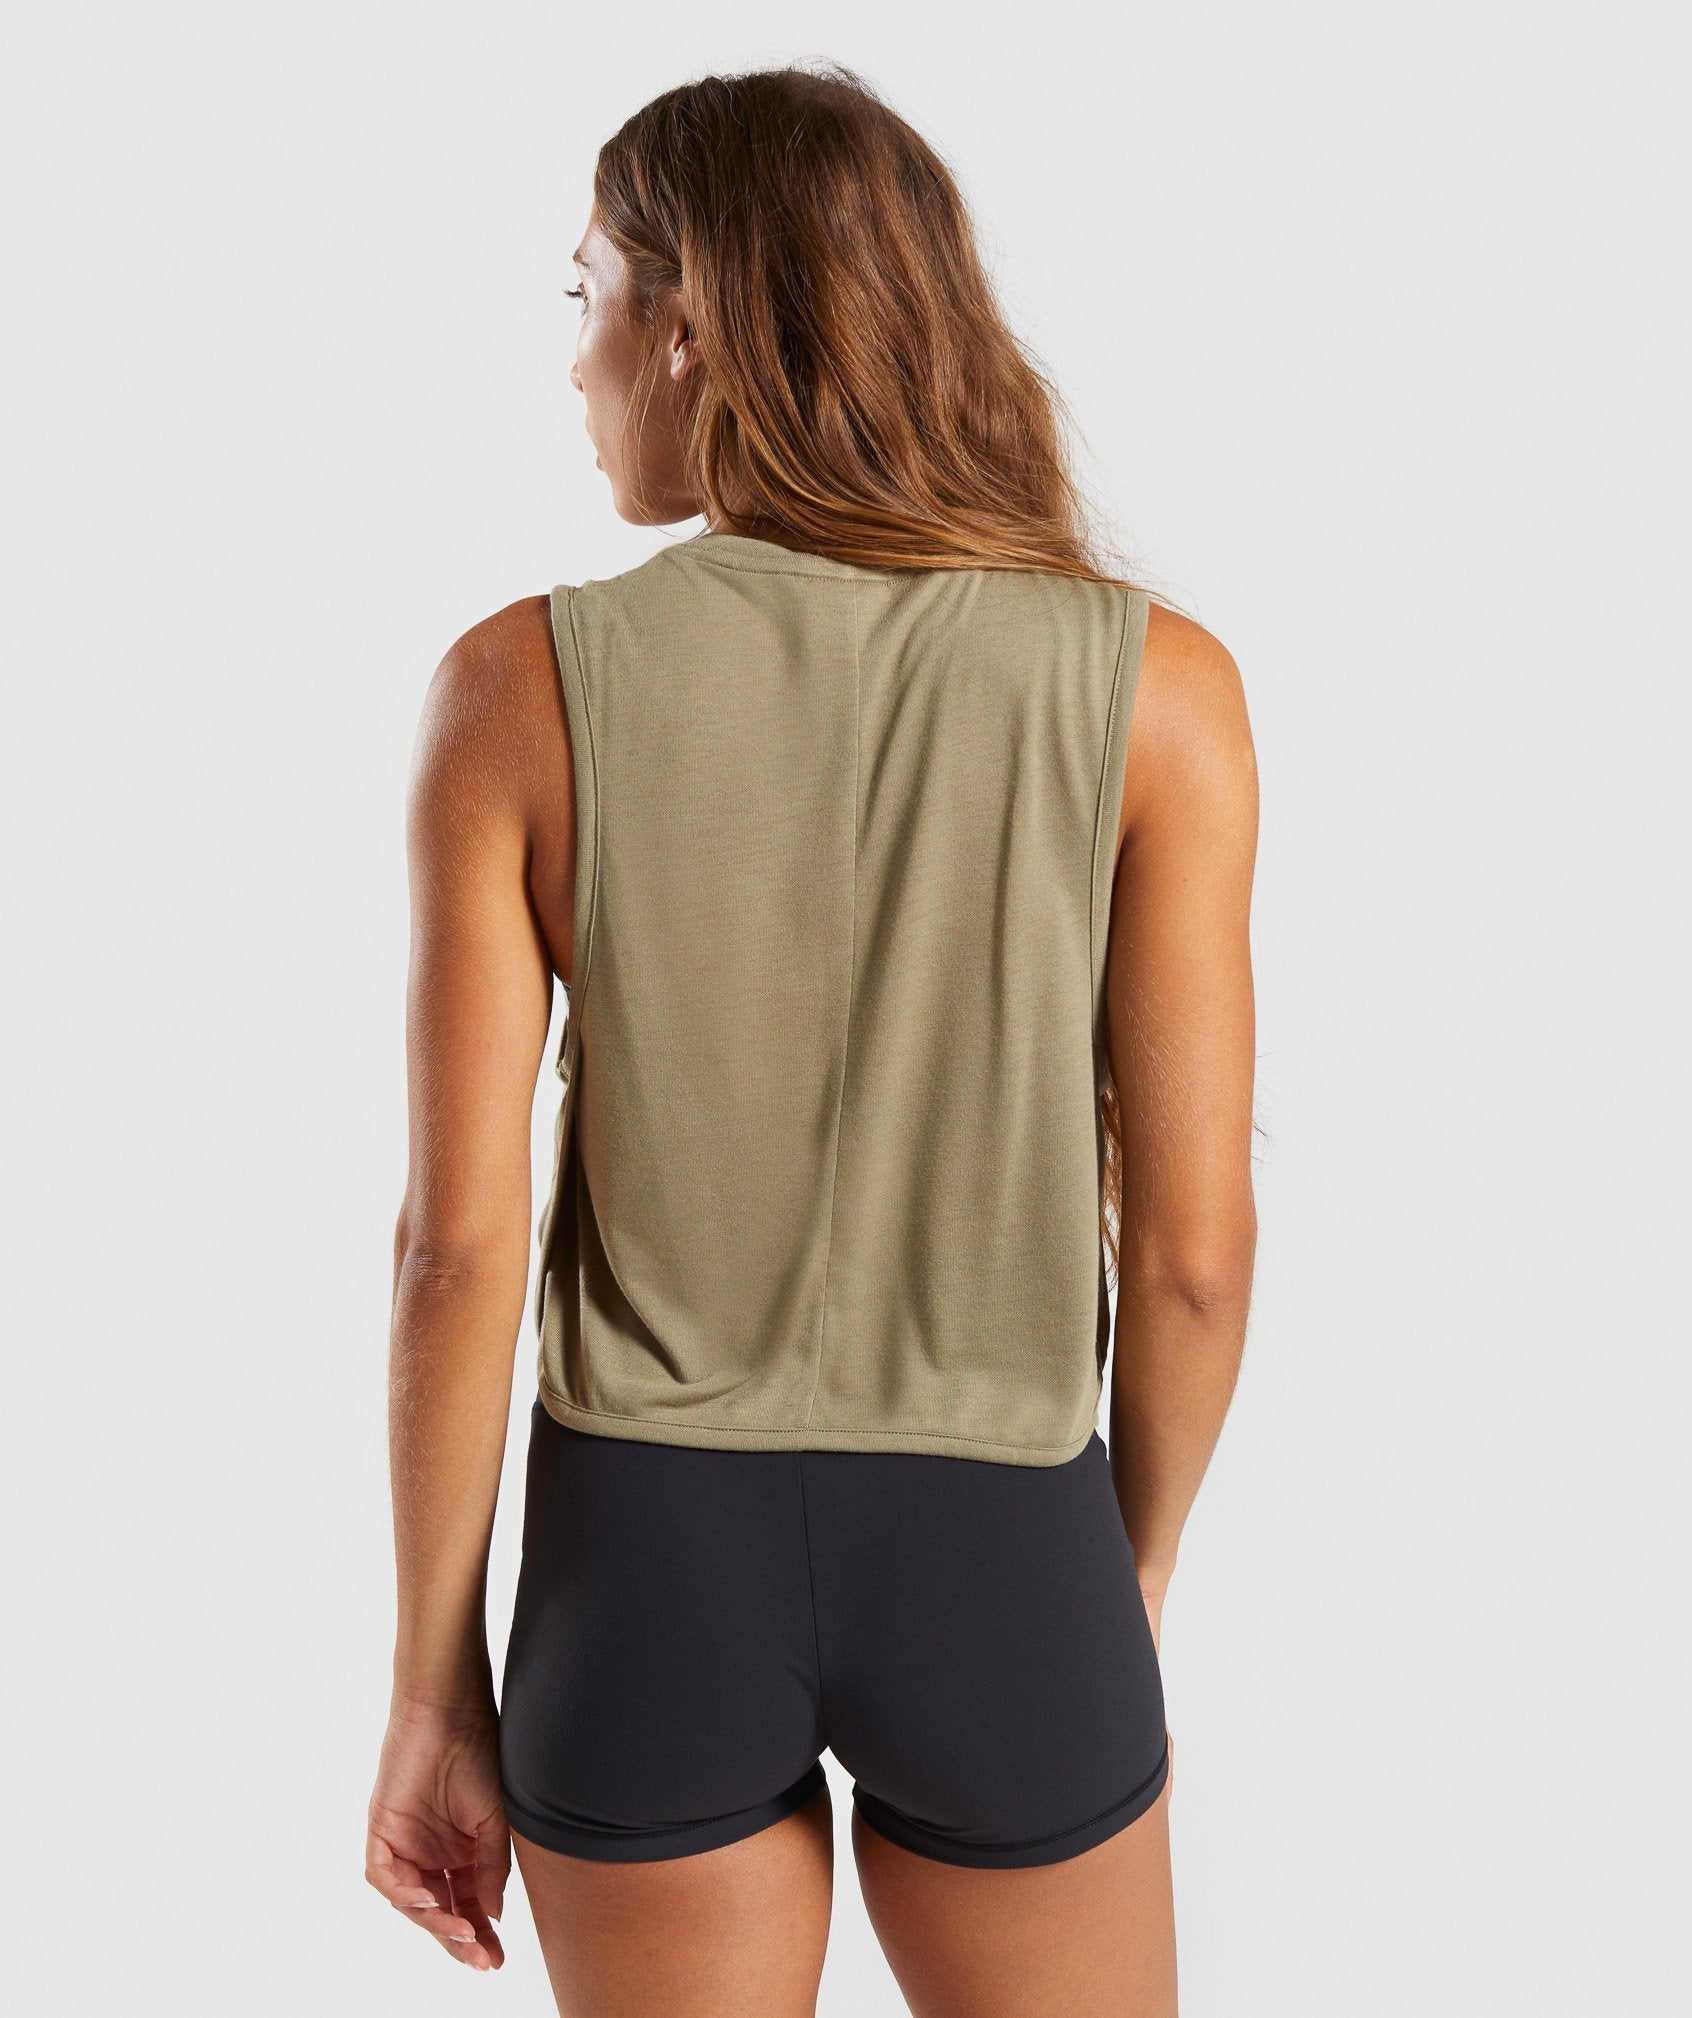 Floral Graphic Tank in Khaki - view 2